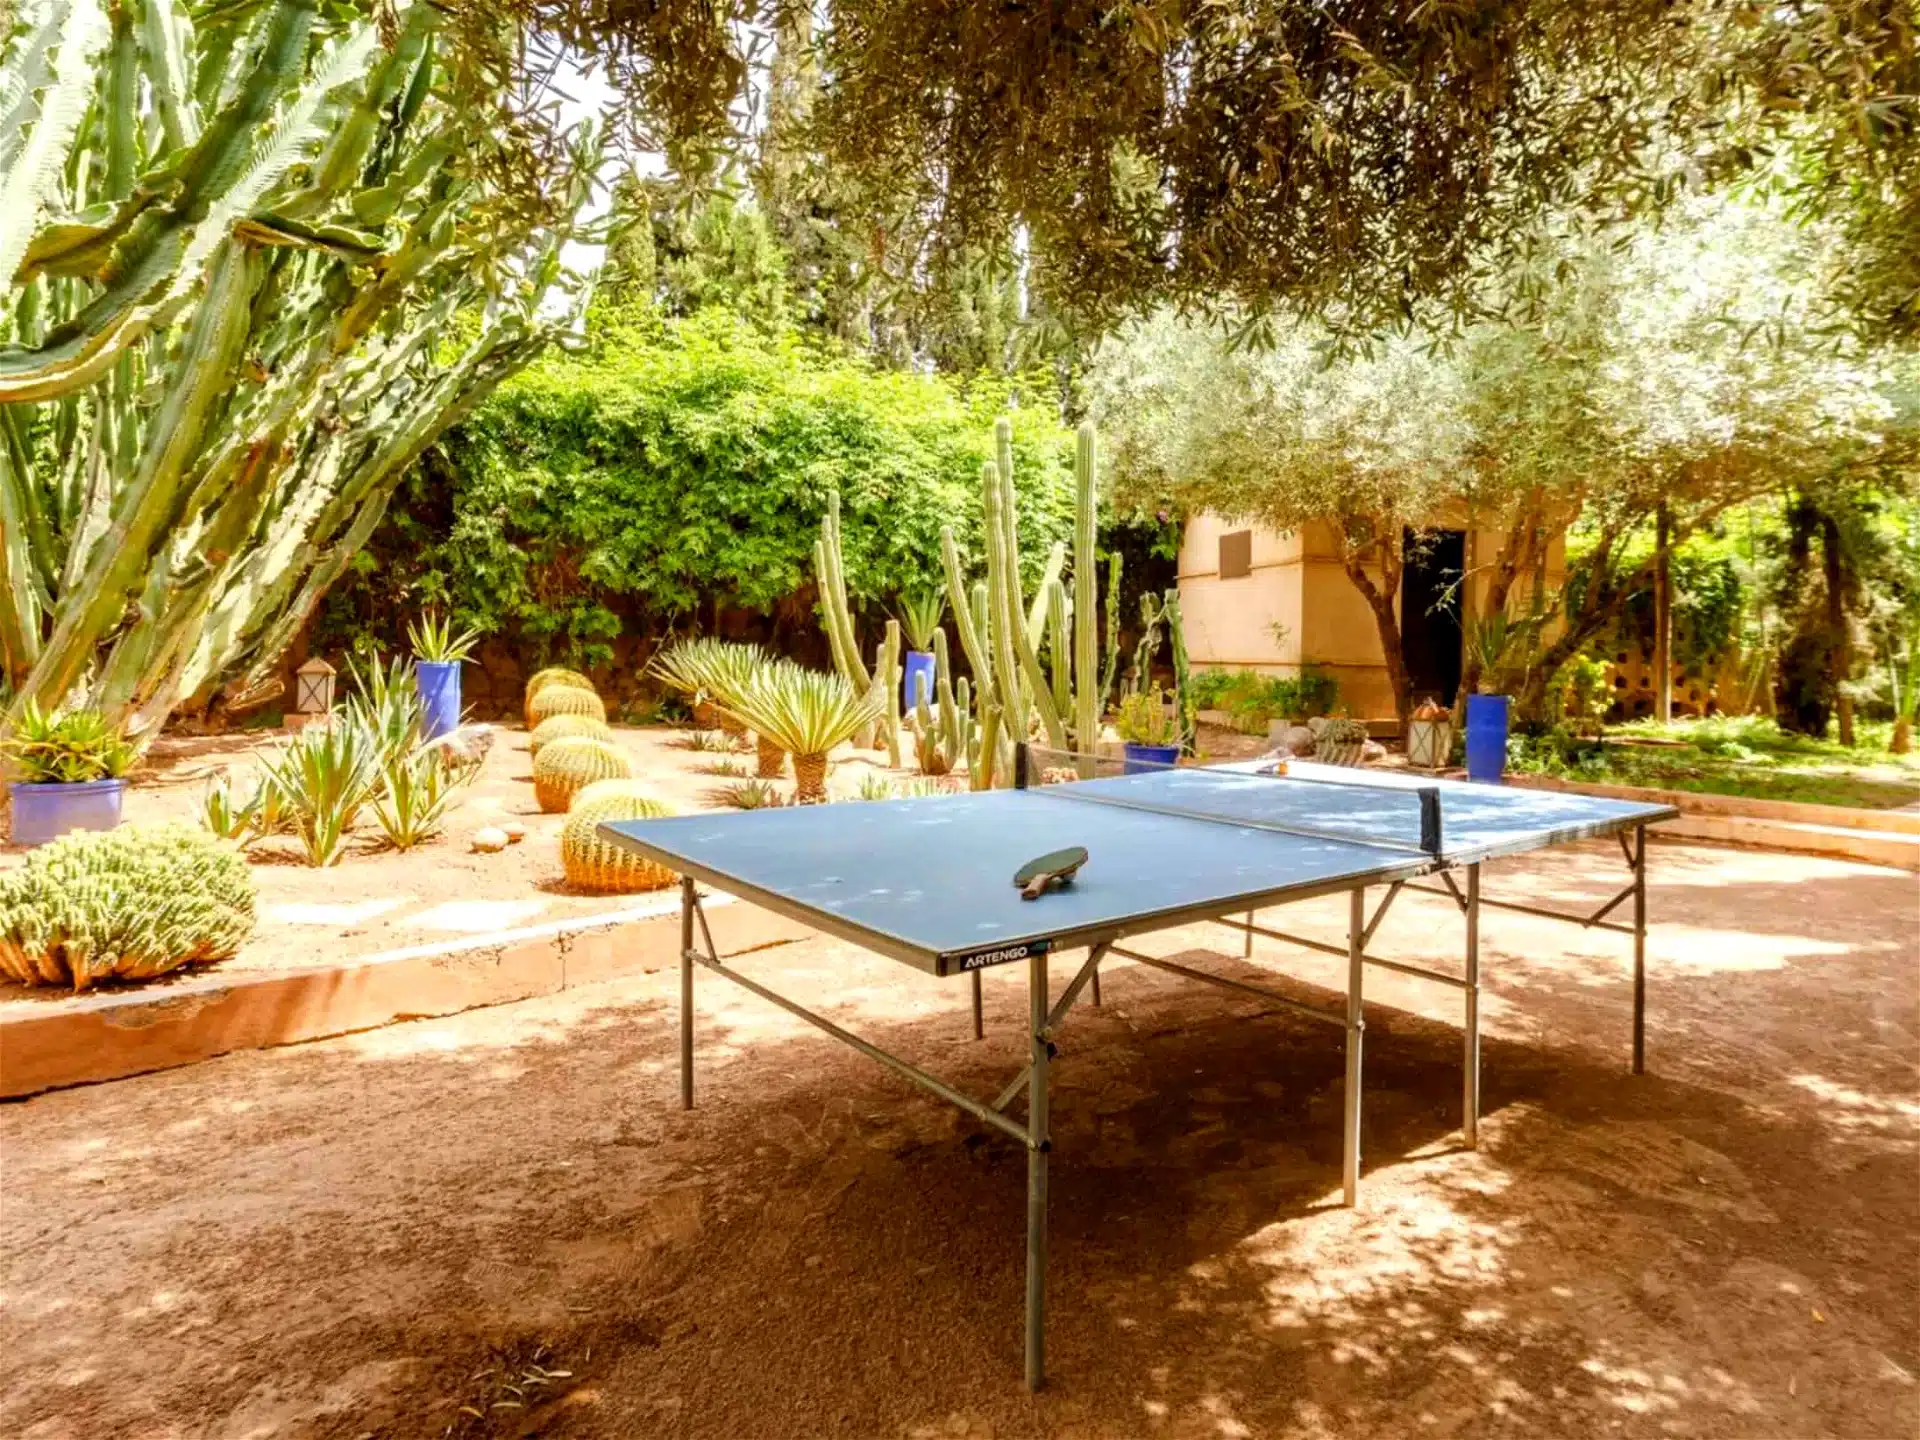 Ping pong table, Luxury Marrakesh Villa, fundraiser auction items, live auction items